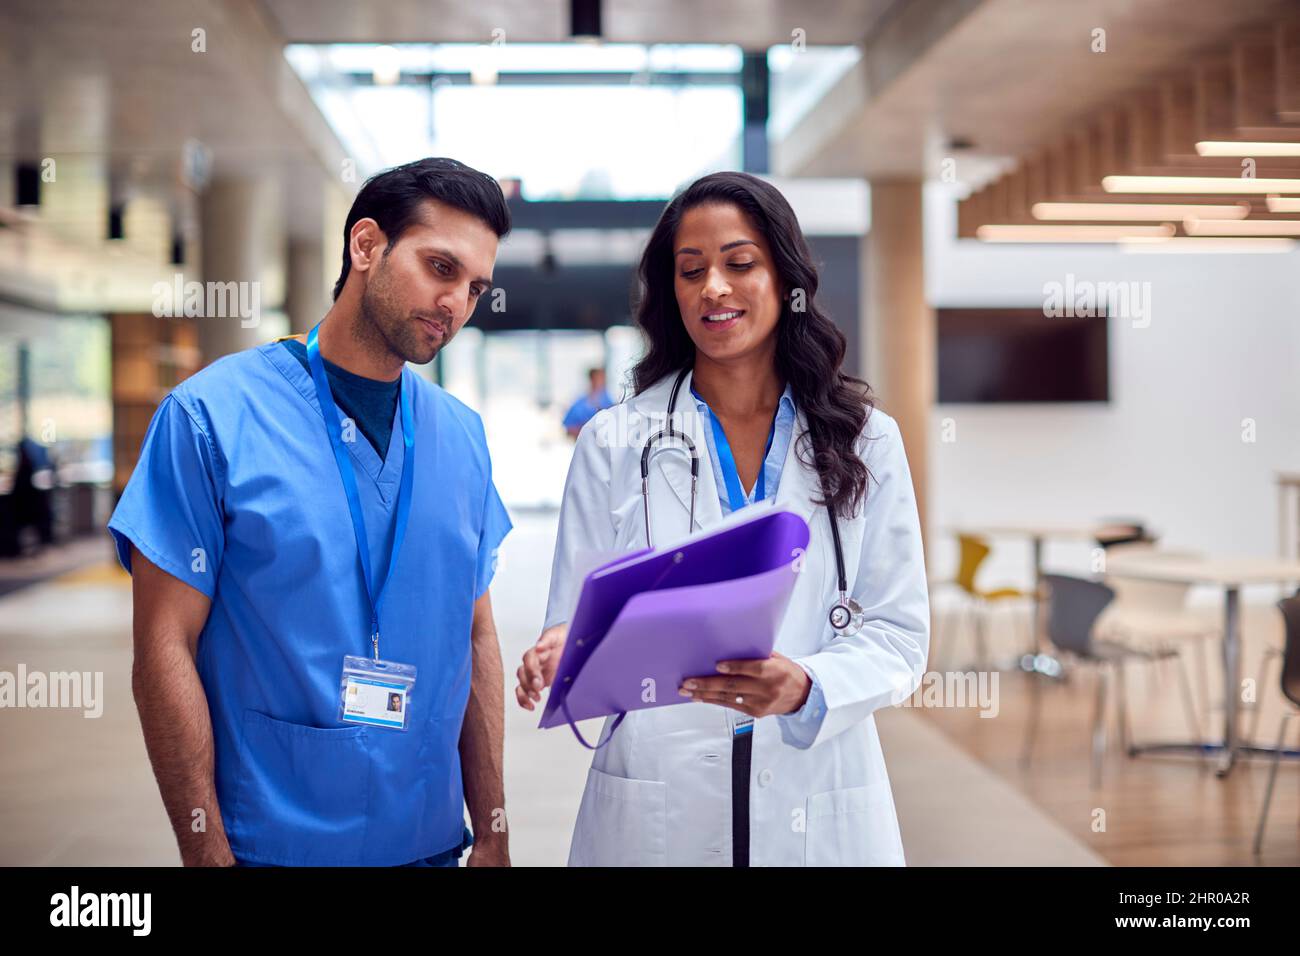 Medical Staff In White Coat And Scrubs Discussing Patient Notes Have Informal Meeting In Hospital Stock Photo